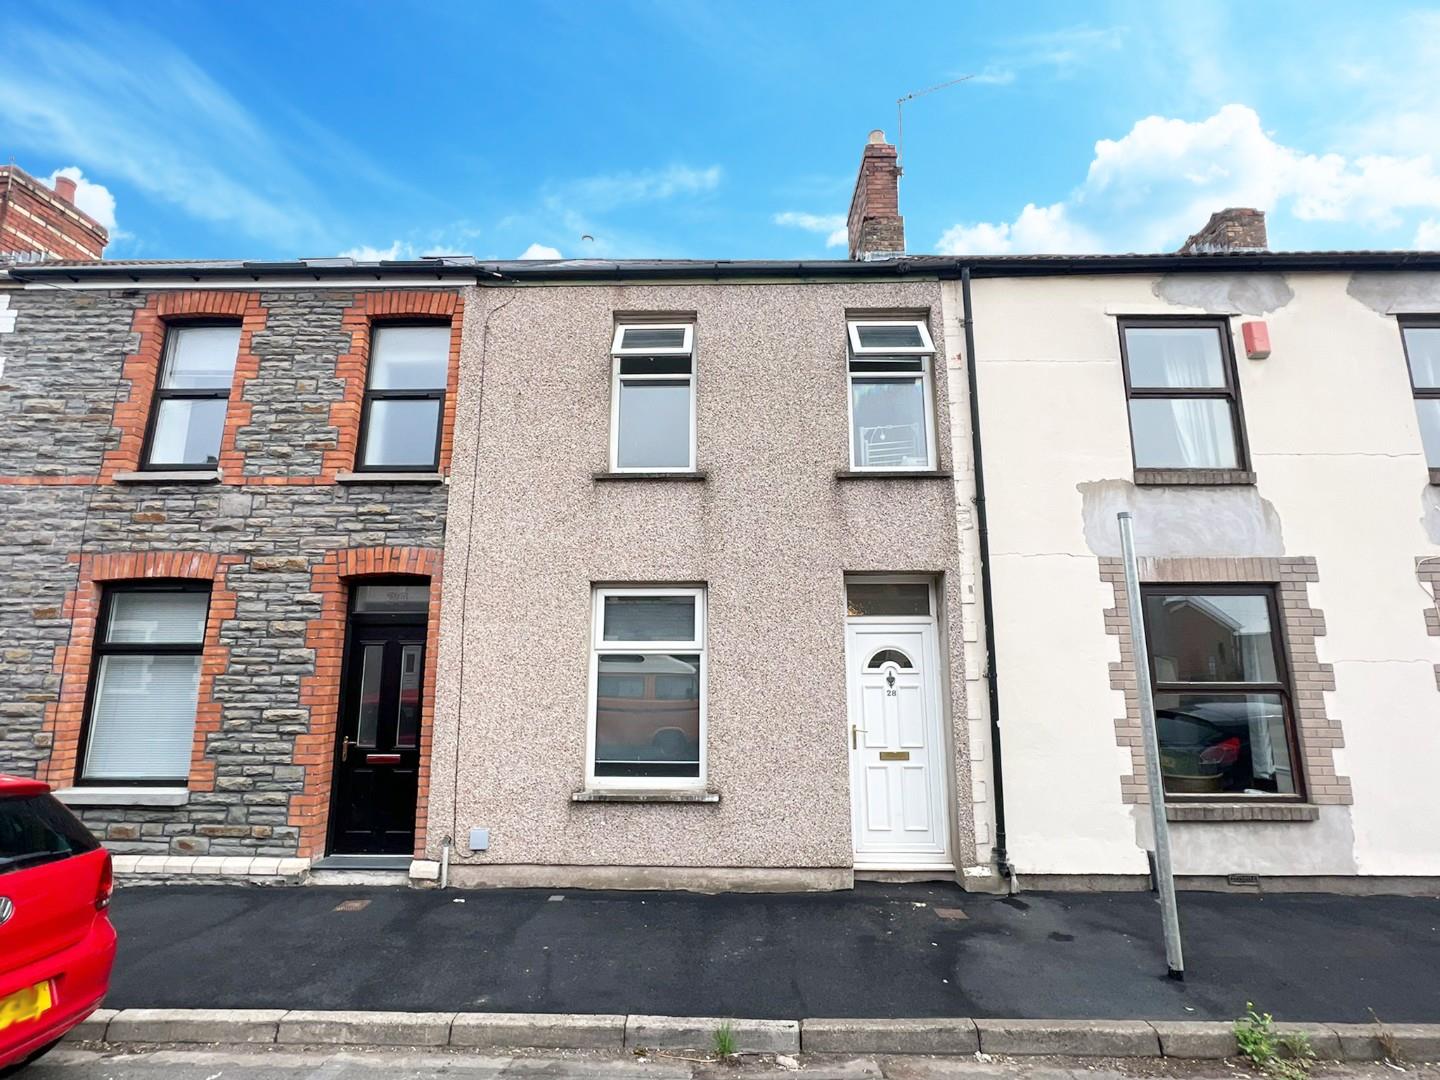 2 bed terraced house for sale in Letty Street, Cardiff, CF24